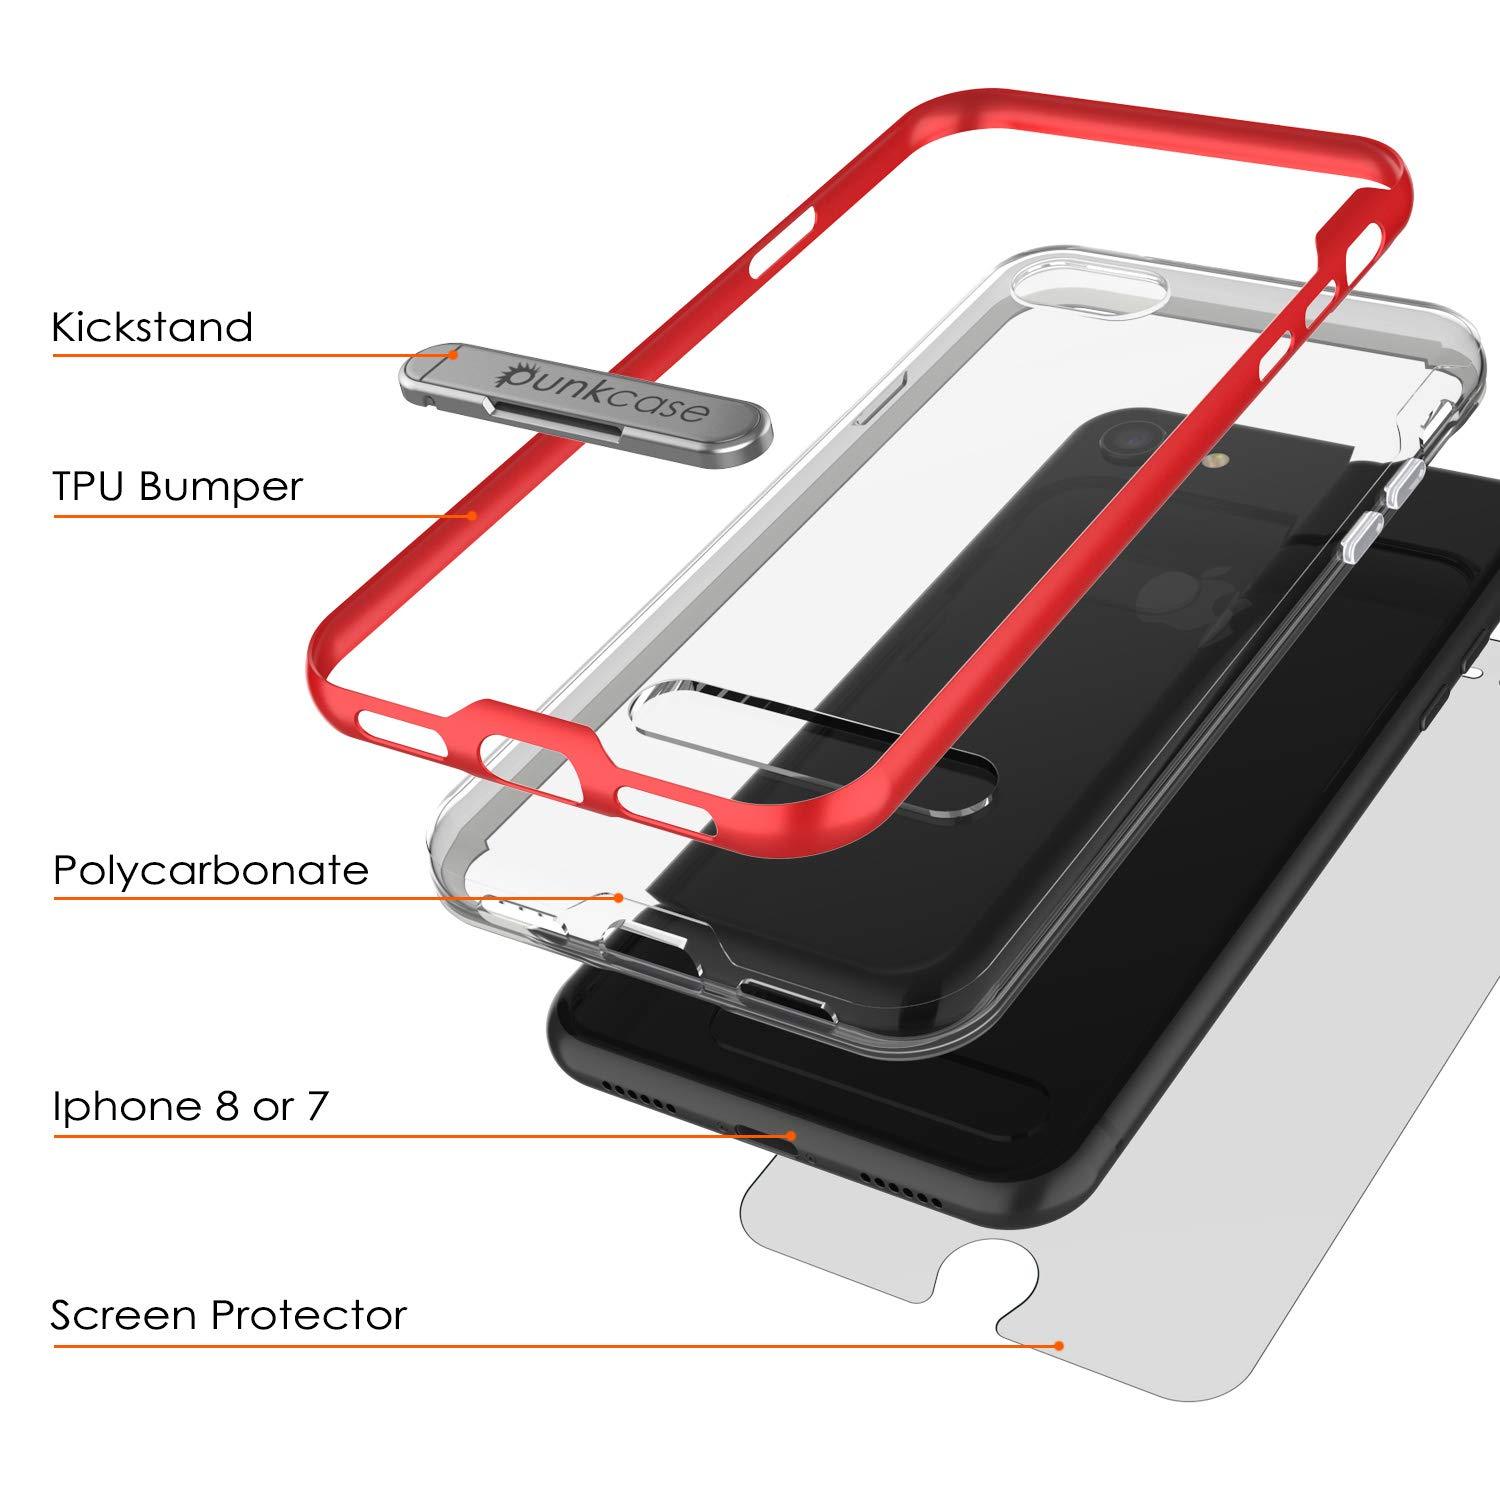 PunkCase iPhone 8 Lucid 3.0 Screen Protector W/ Anti-Shock Case [Red]